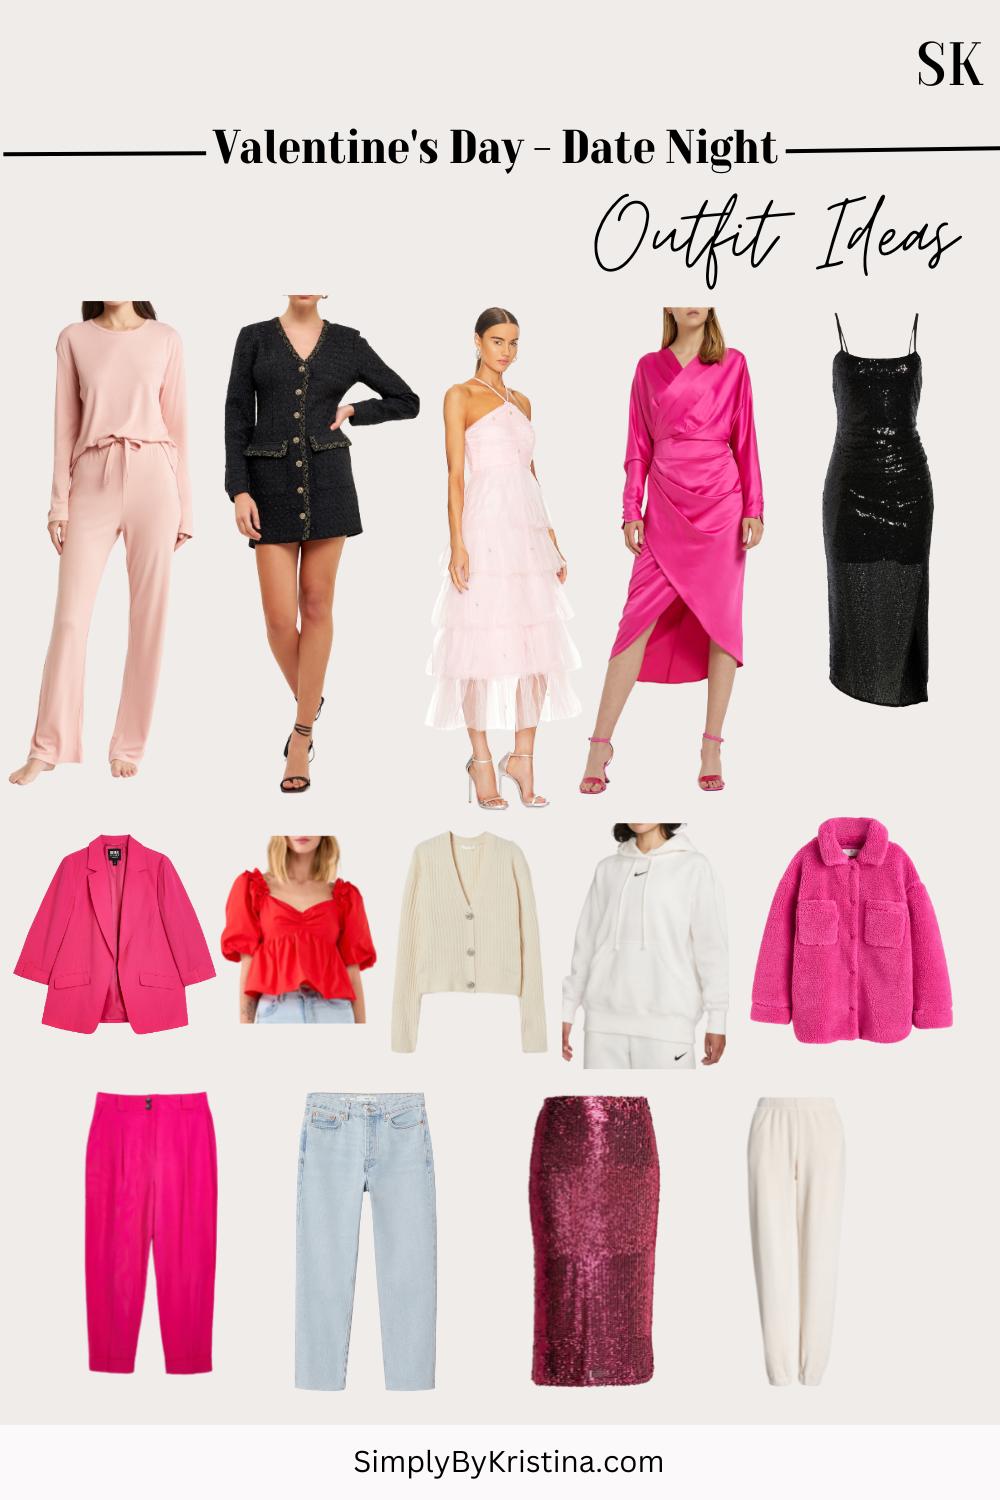 Valentine's Day Clothes: Day, Girls' Night and Date Night